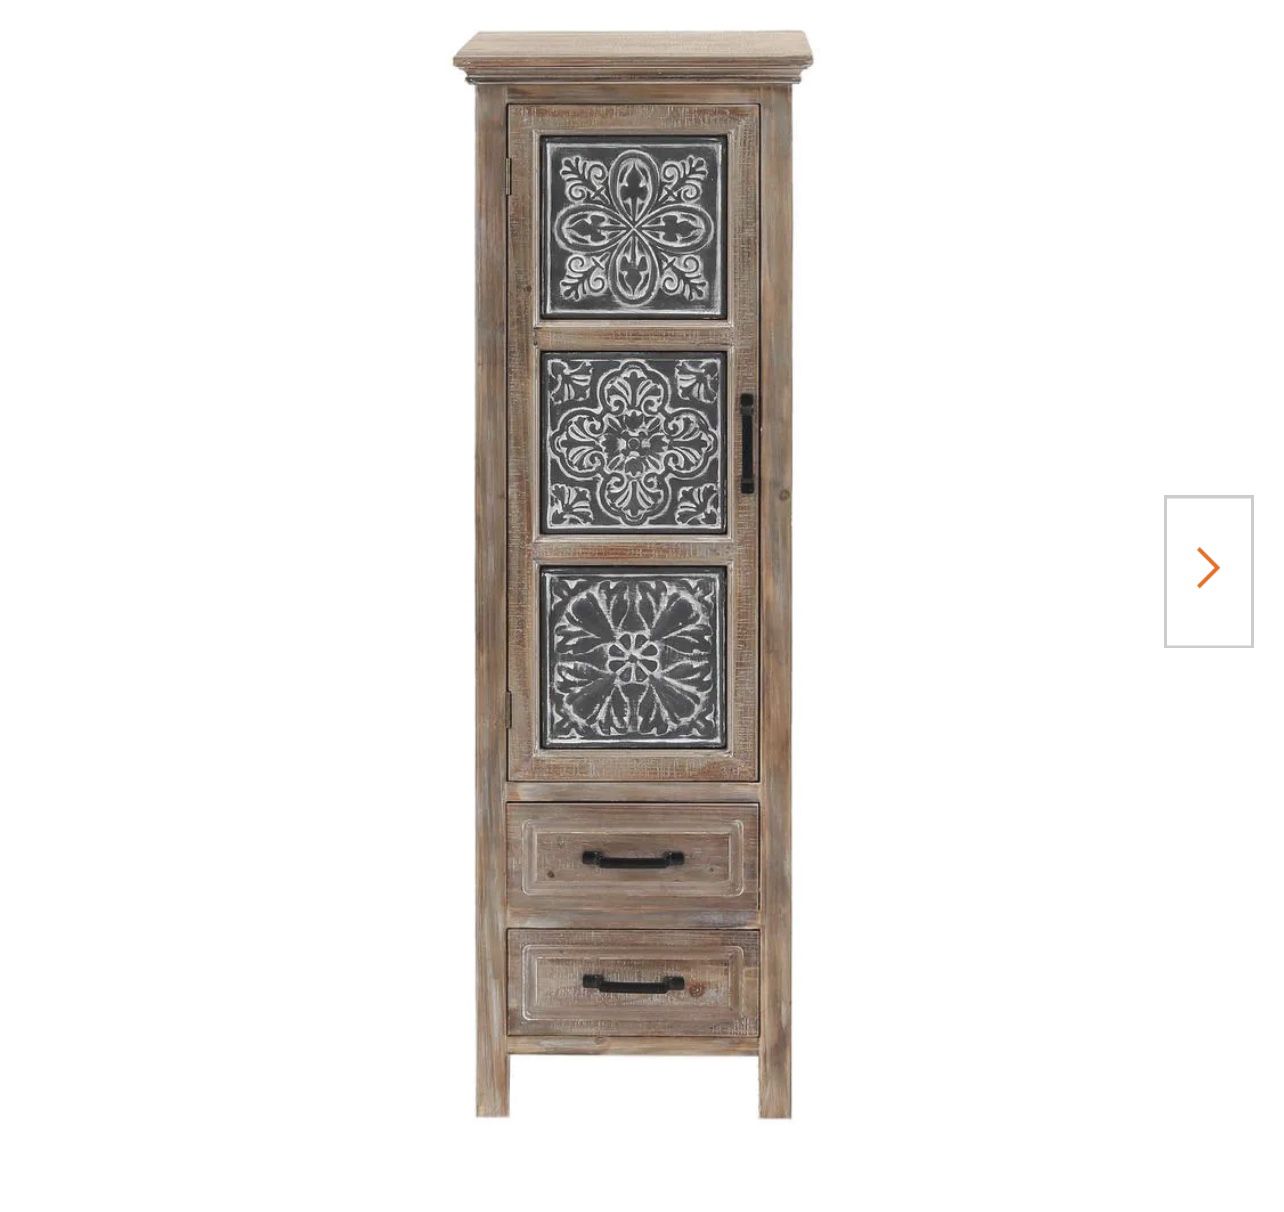 Rustic Wood Floral Tall Accent Cabinet with White Metal Inserts